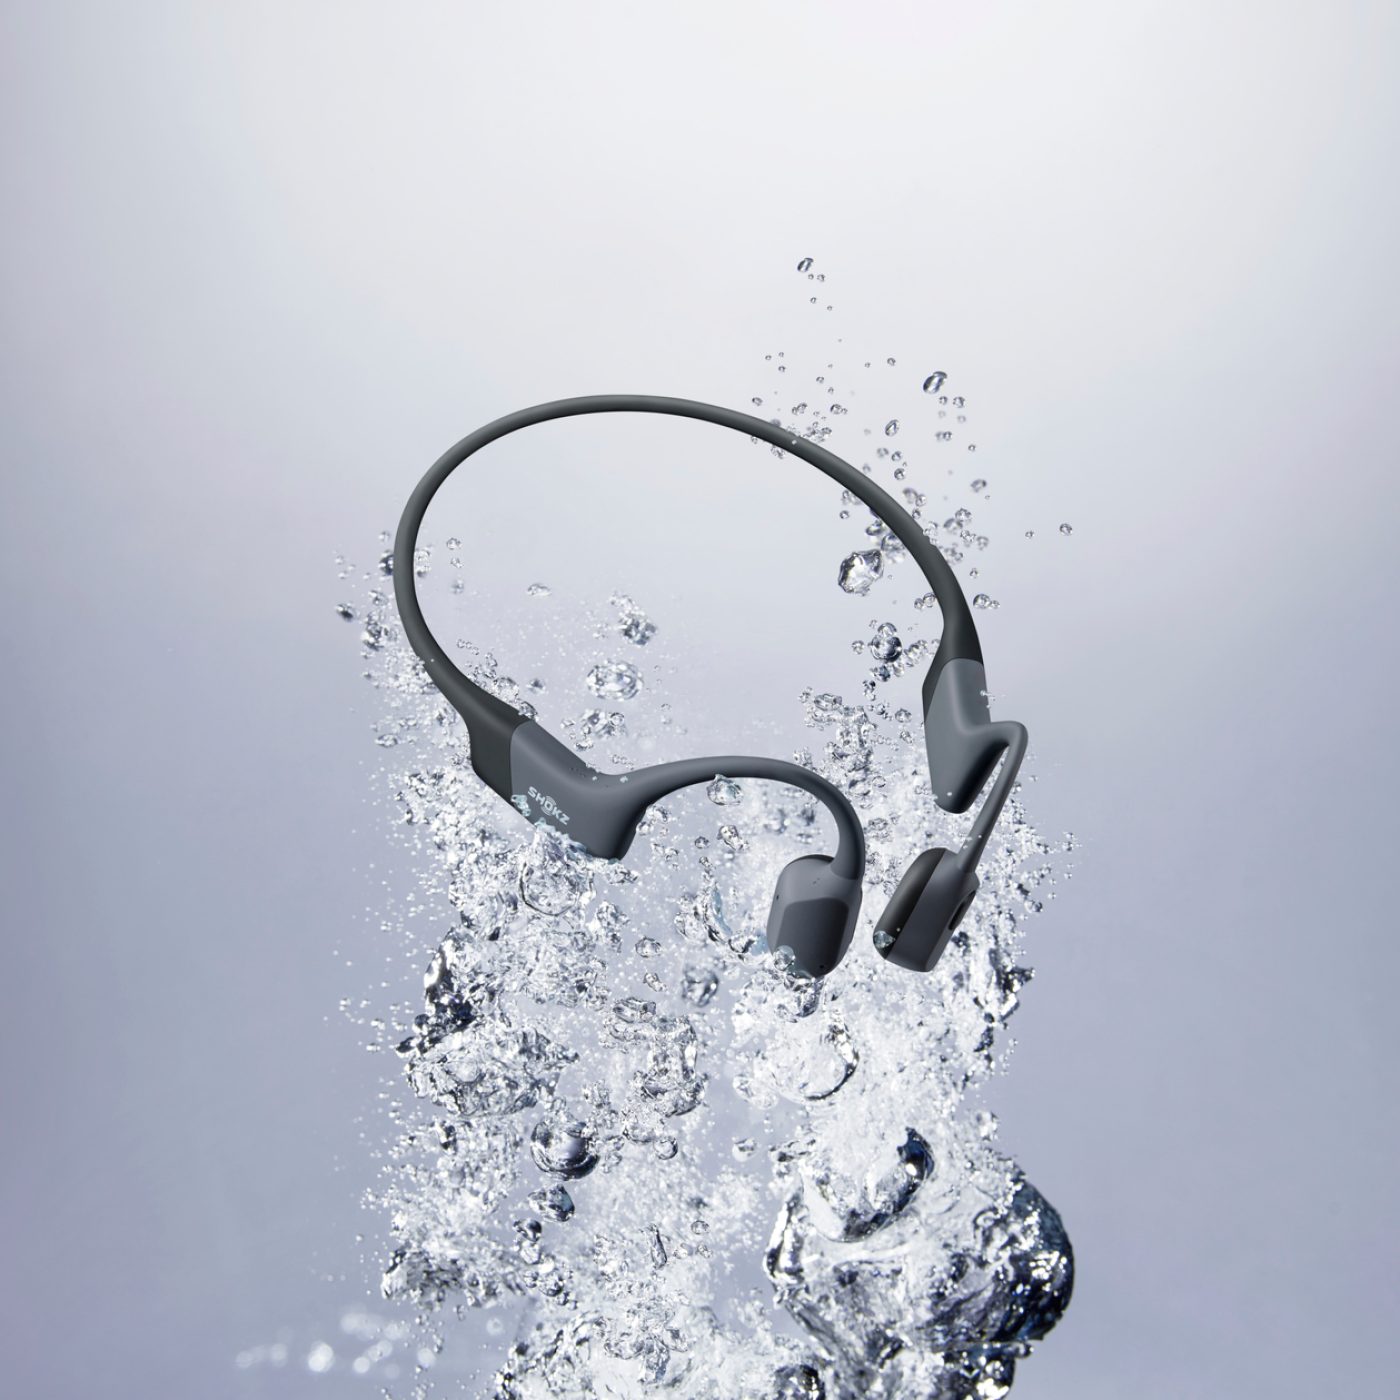 Shokz OpenSwim Pro announced with Bluetooth and MP3 support